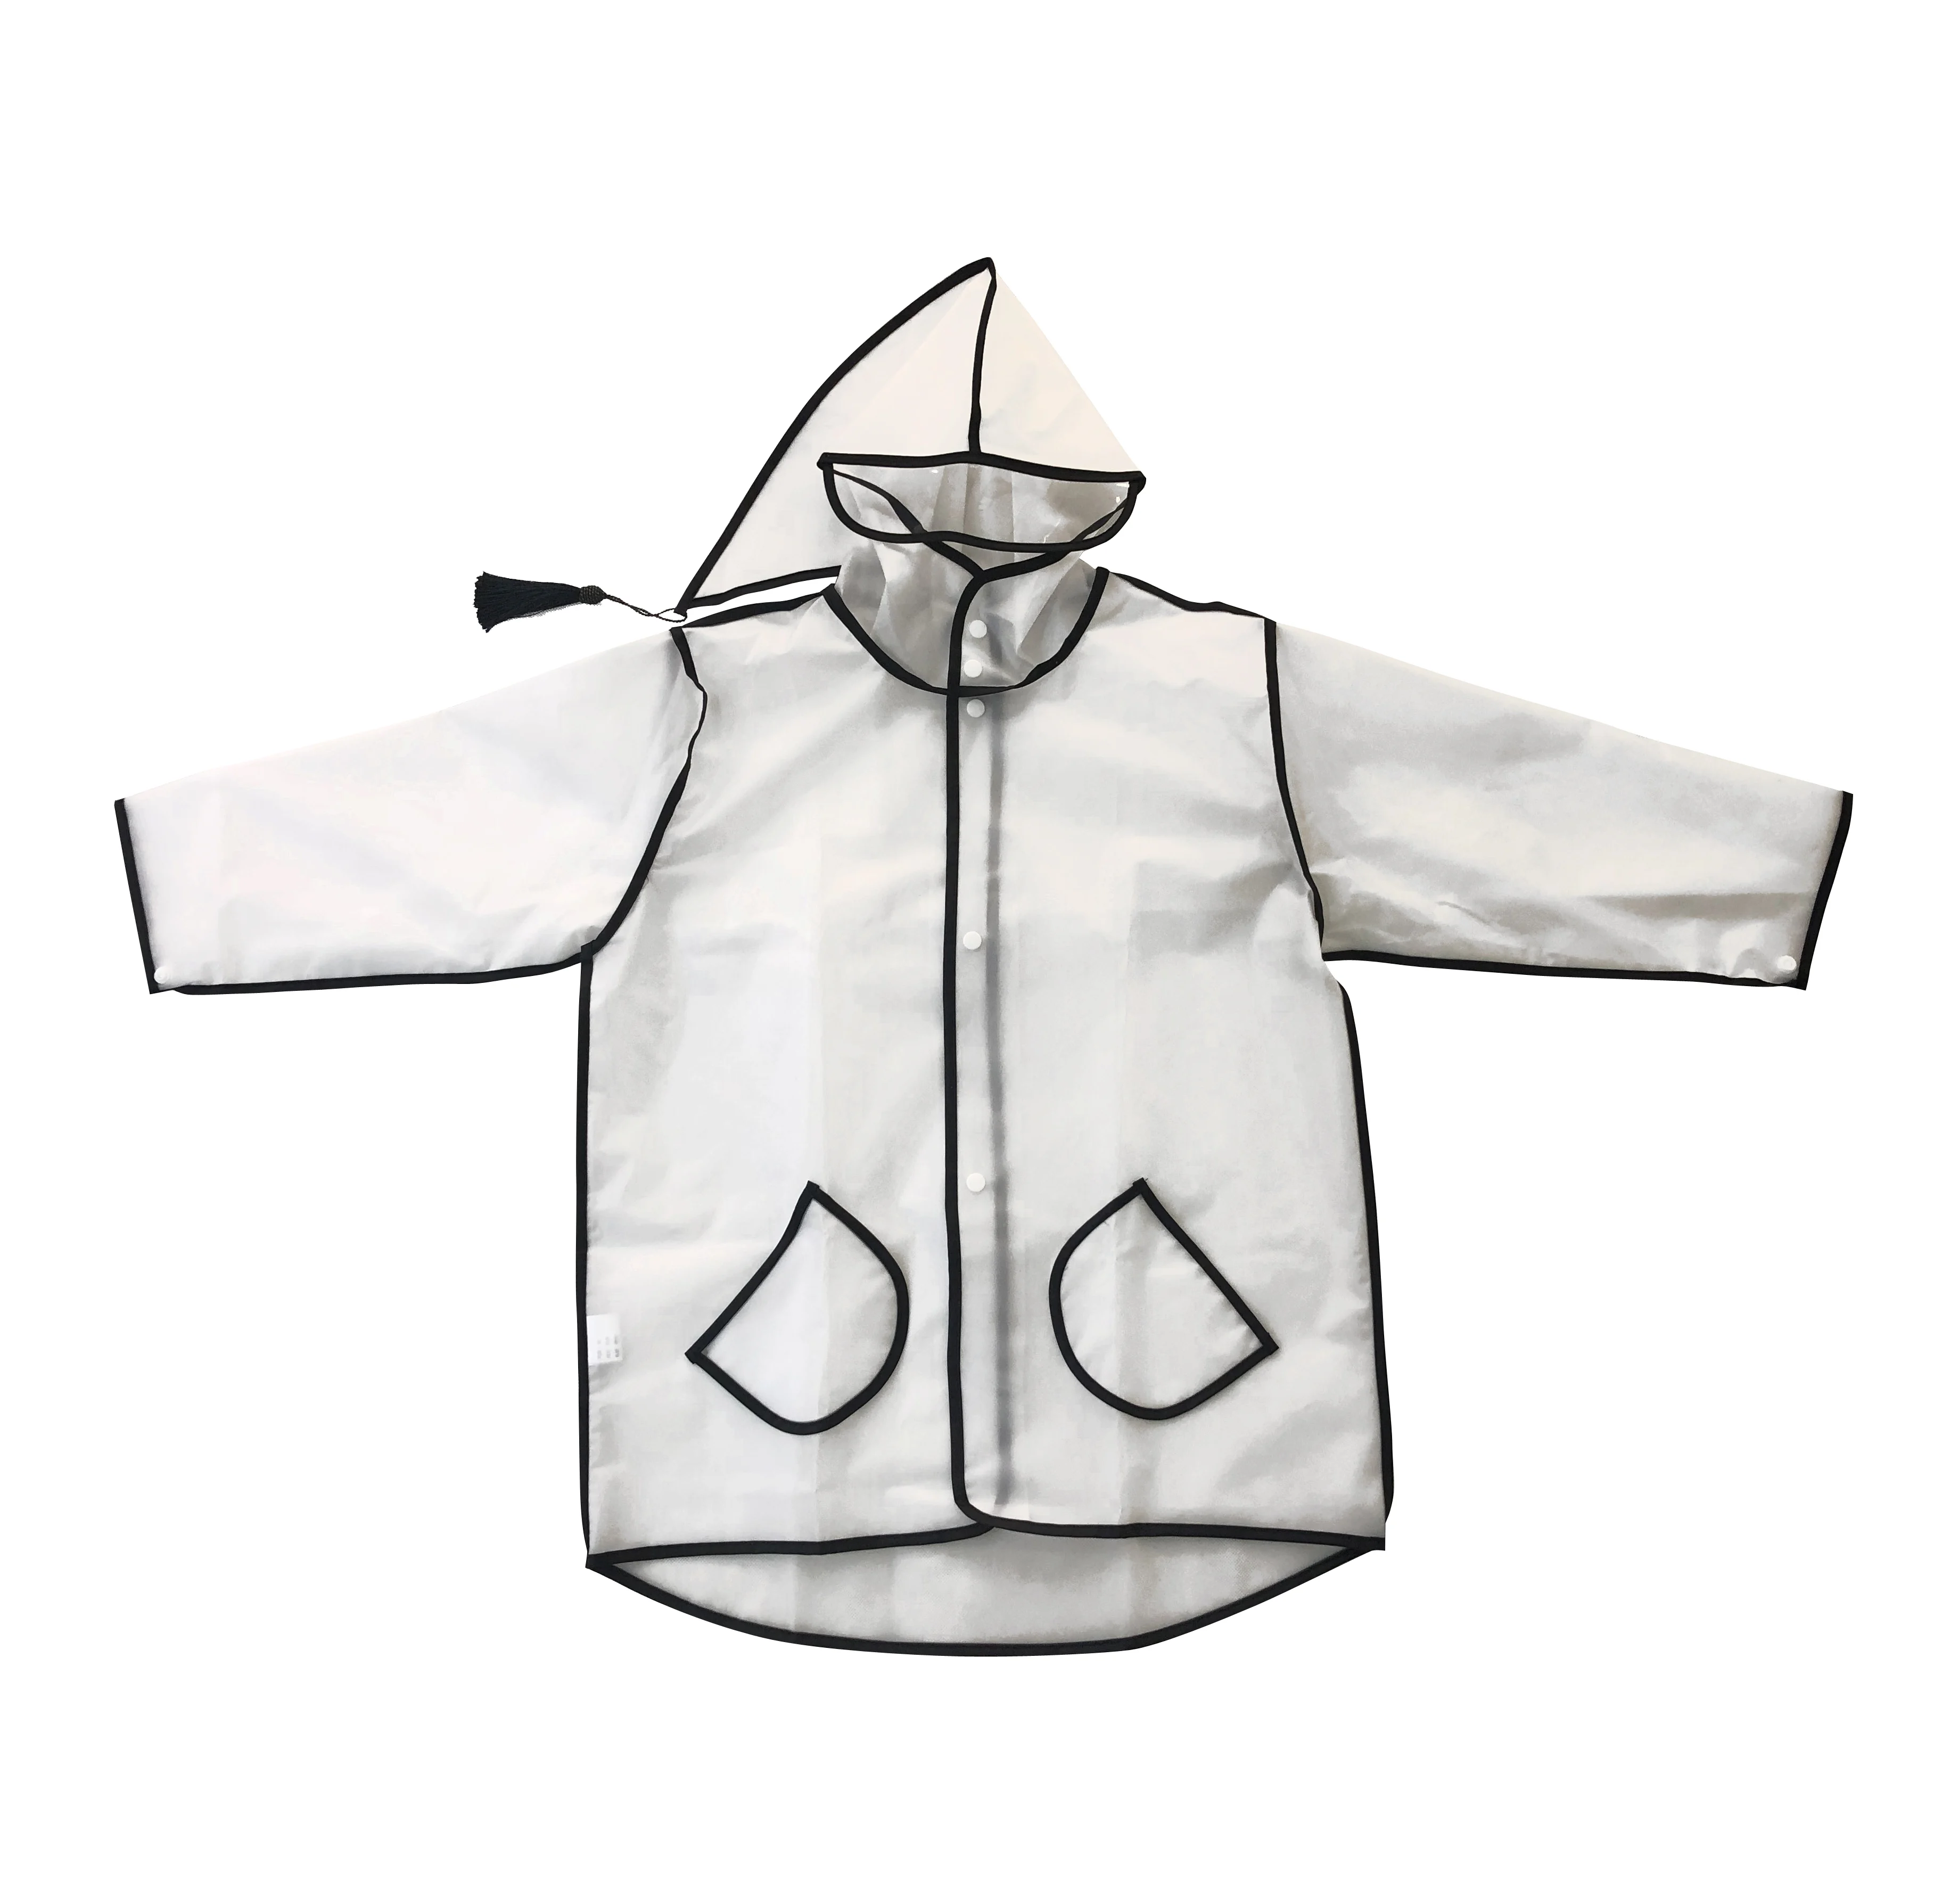 

2021 Cheap Clear Children's Transparent Cute Baby 1-6 Years Old PVC Kids Rain Coat Waterproof Poncho Child Raincoat, White or any color